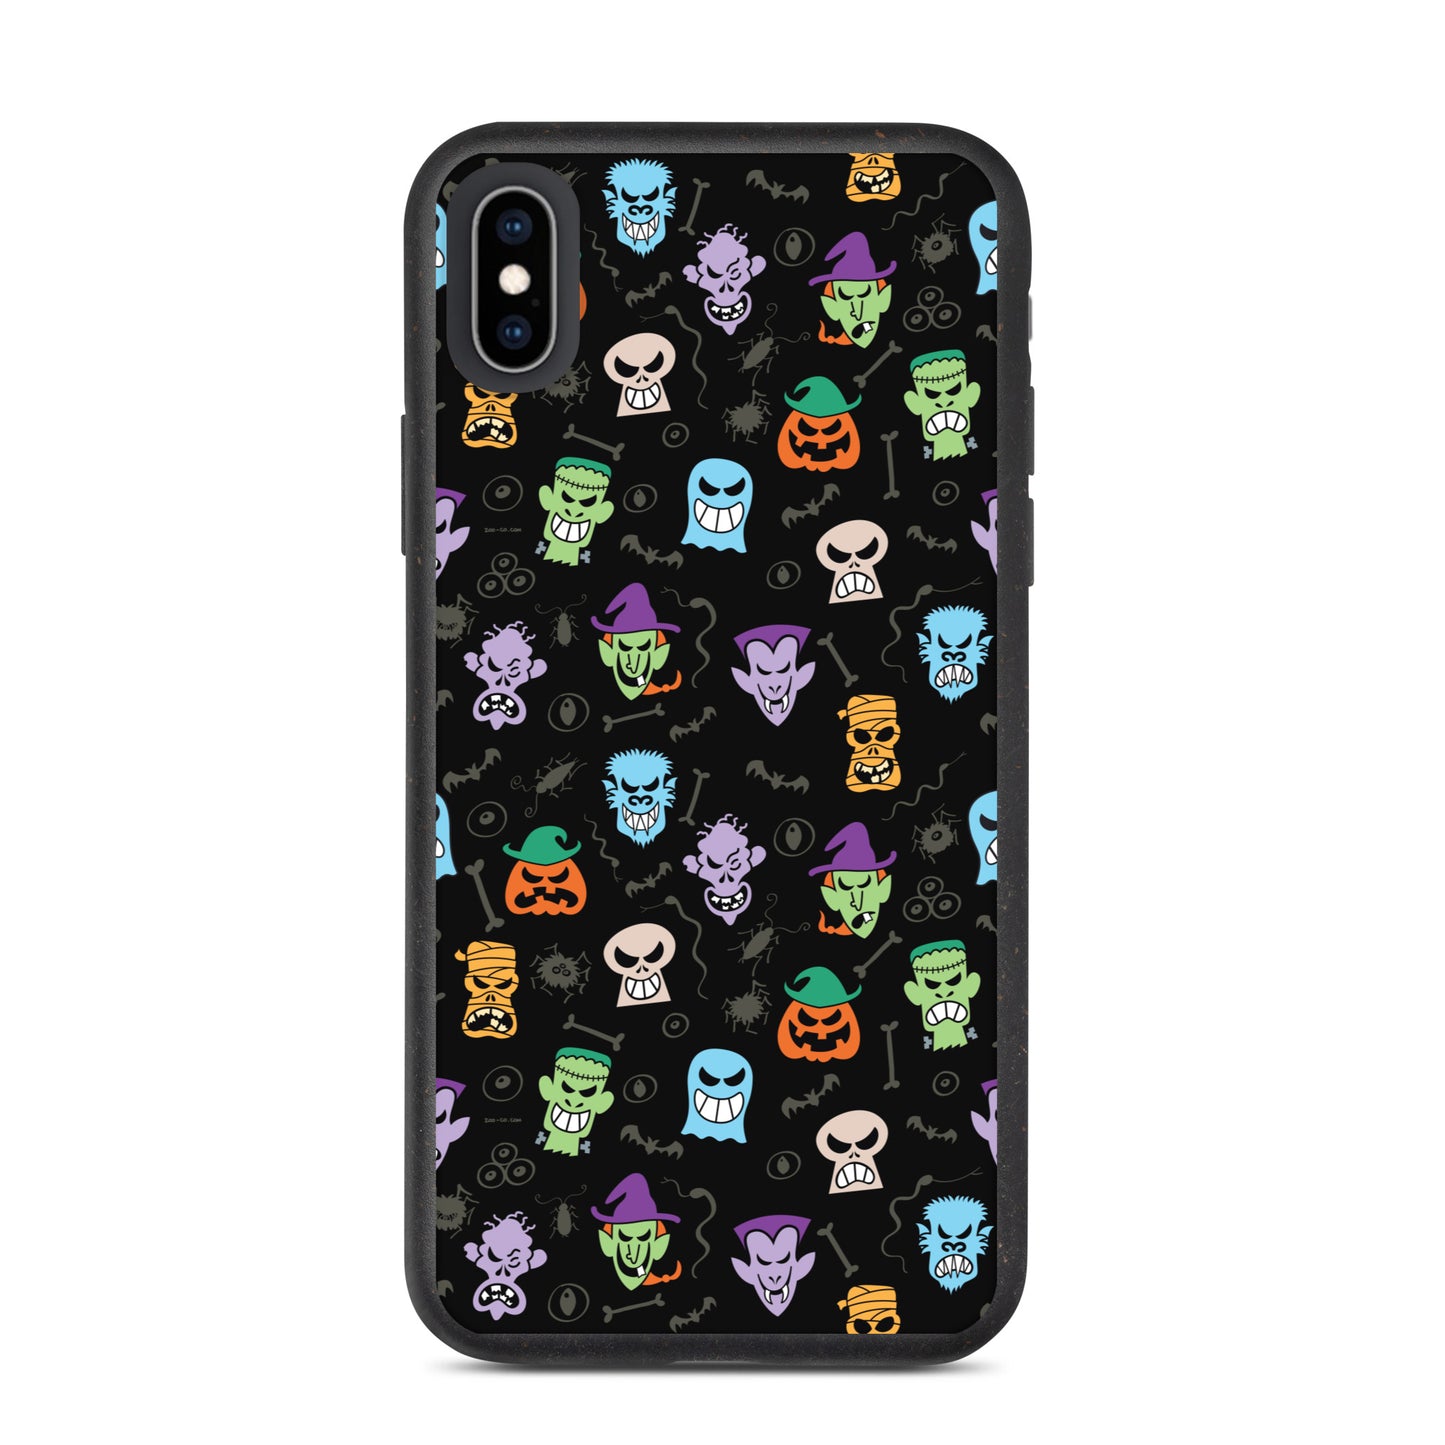 Scary Halloween faces Speckled iPhone case. iPhone xs max